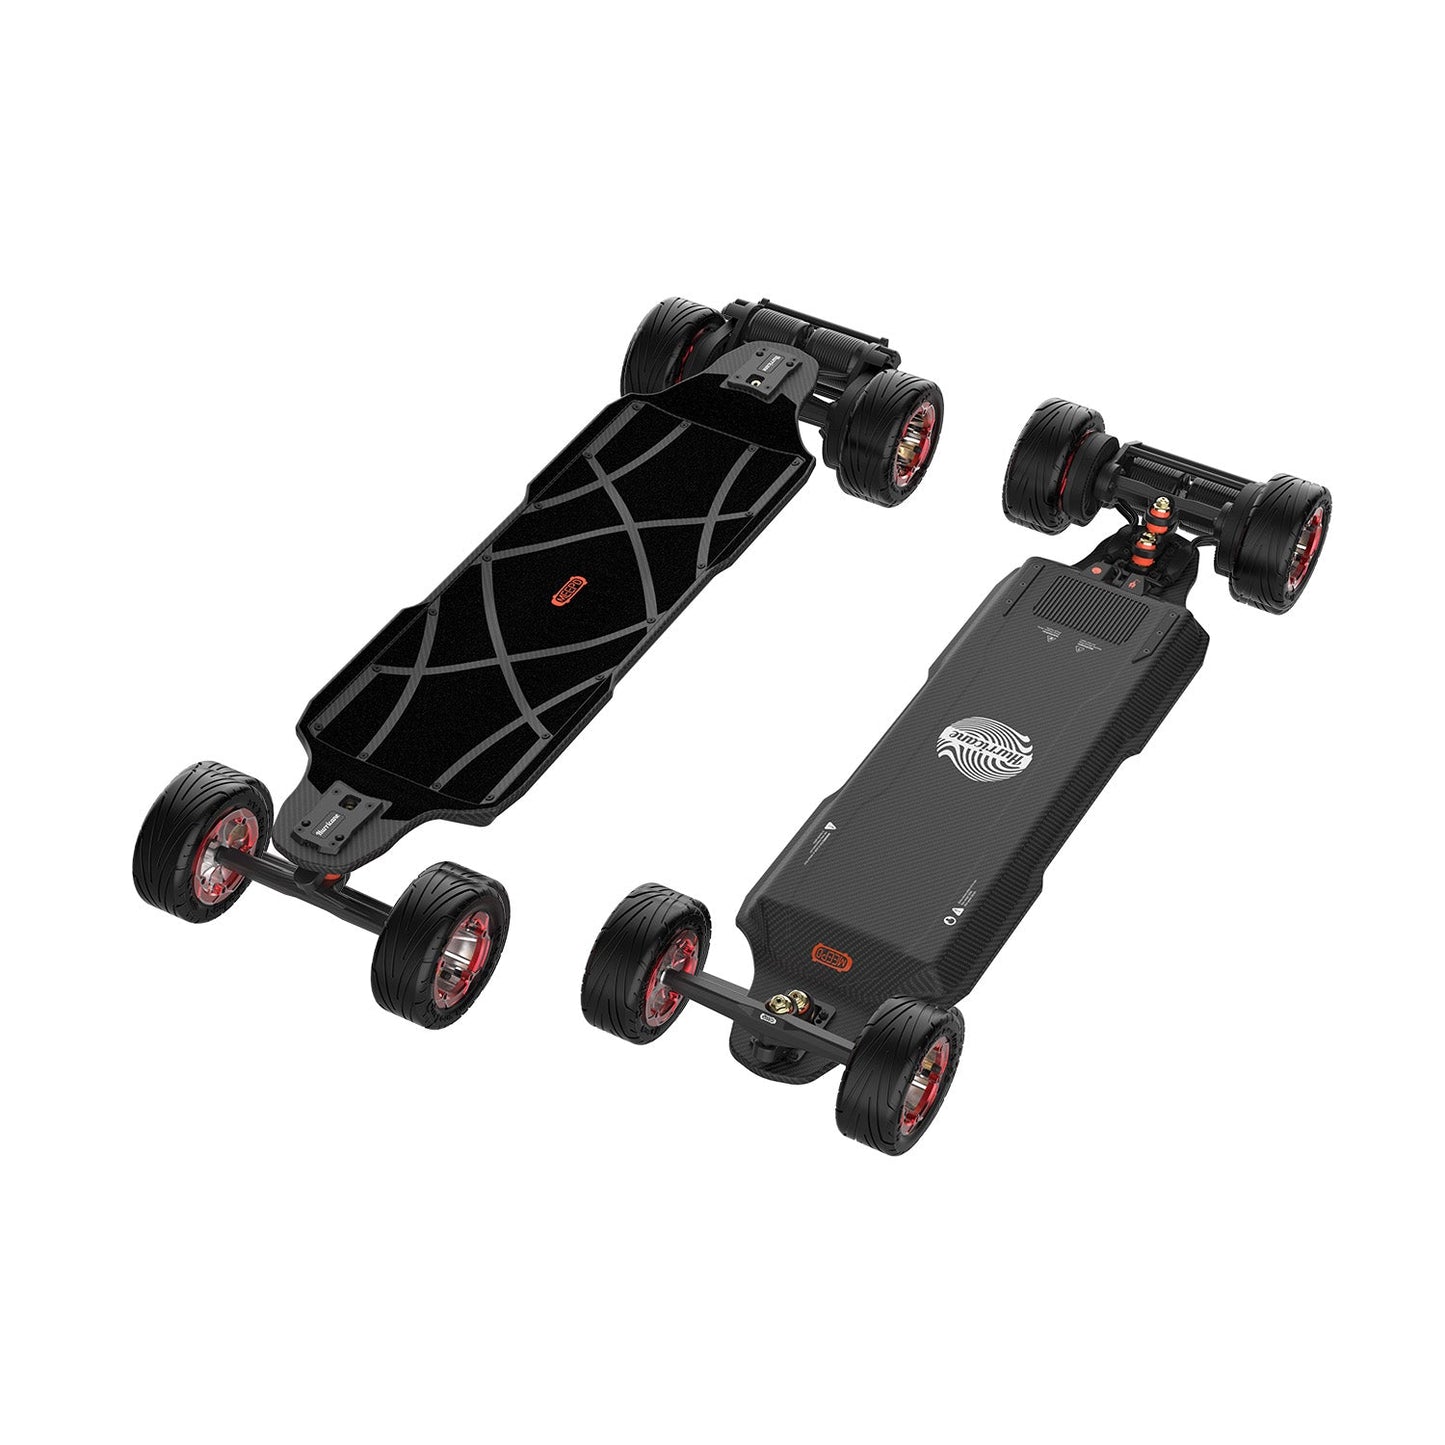 MEEPO Hurricane Ultra X - Customize Your Own Ride - Free Worldwide Air Shipping